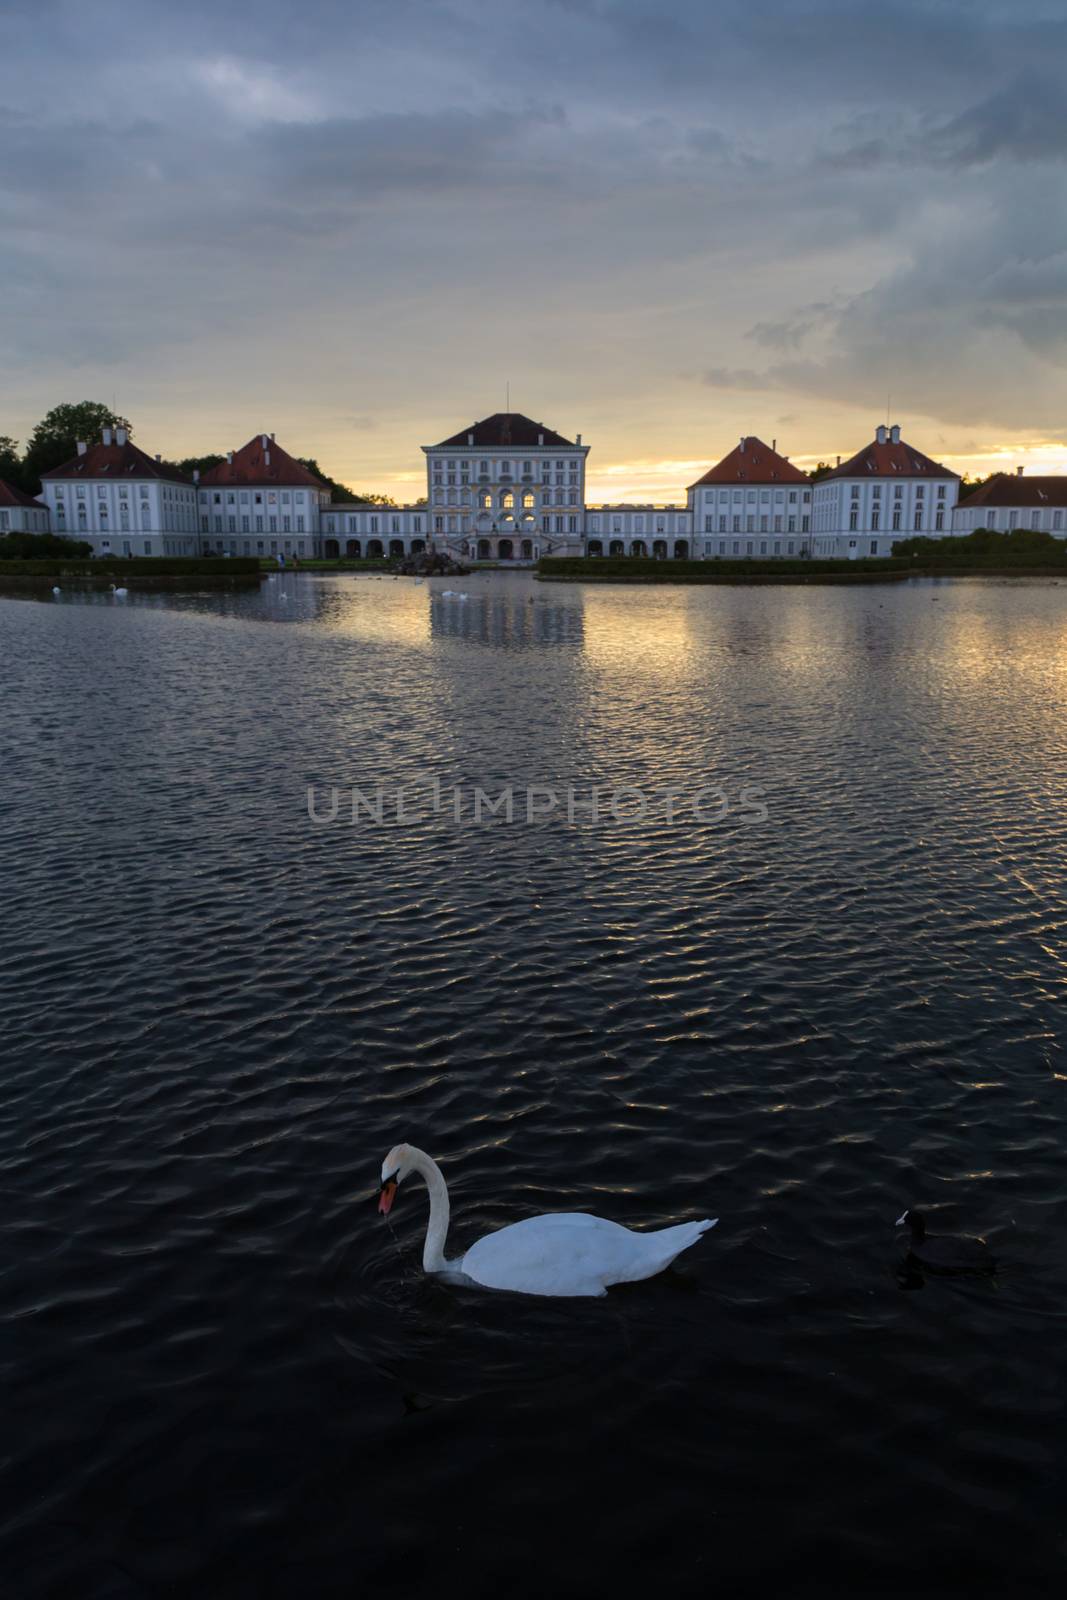 Dramatic scenery of Nymphenburg palace in Munich Germany. Sunset after the sorm. White swan swimming in pond in front of the palace.